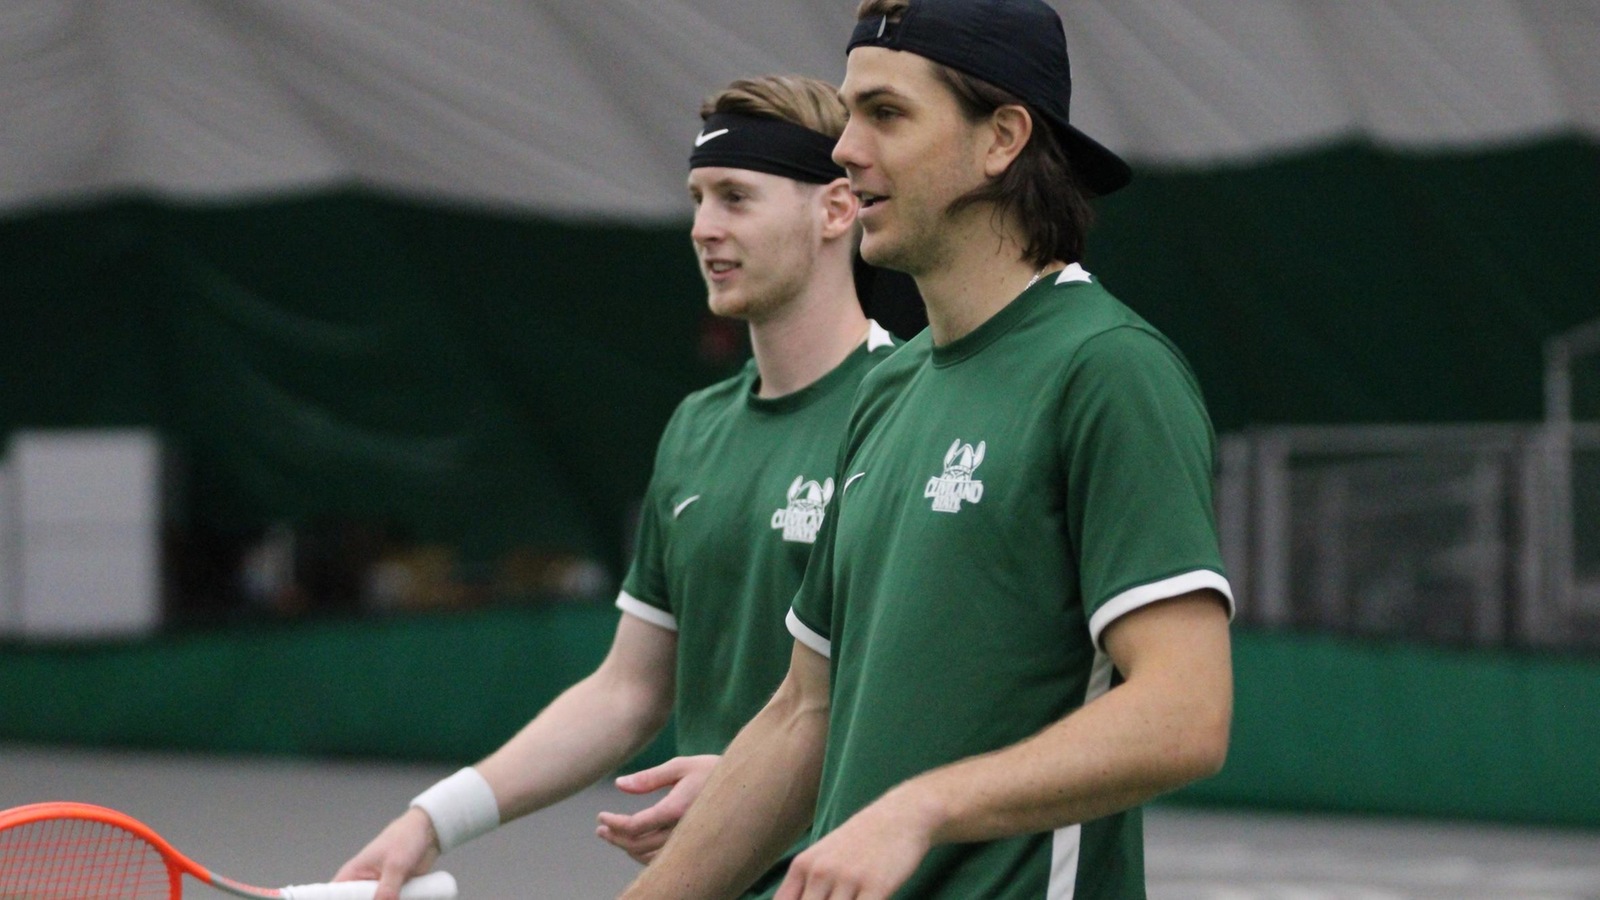 Cleveland State Men's Tennis Sweeps #HLTennis Weekly Awards